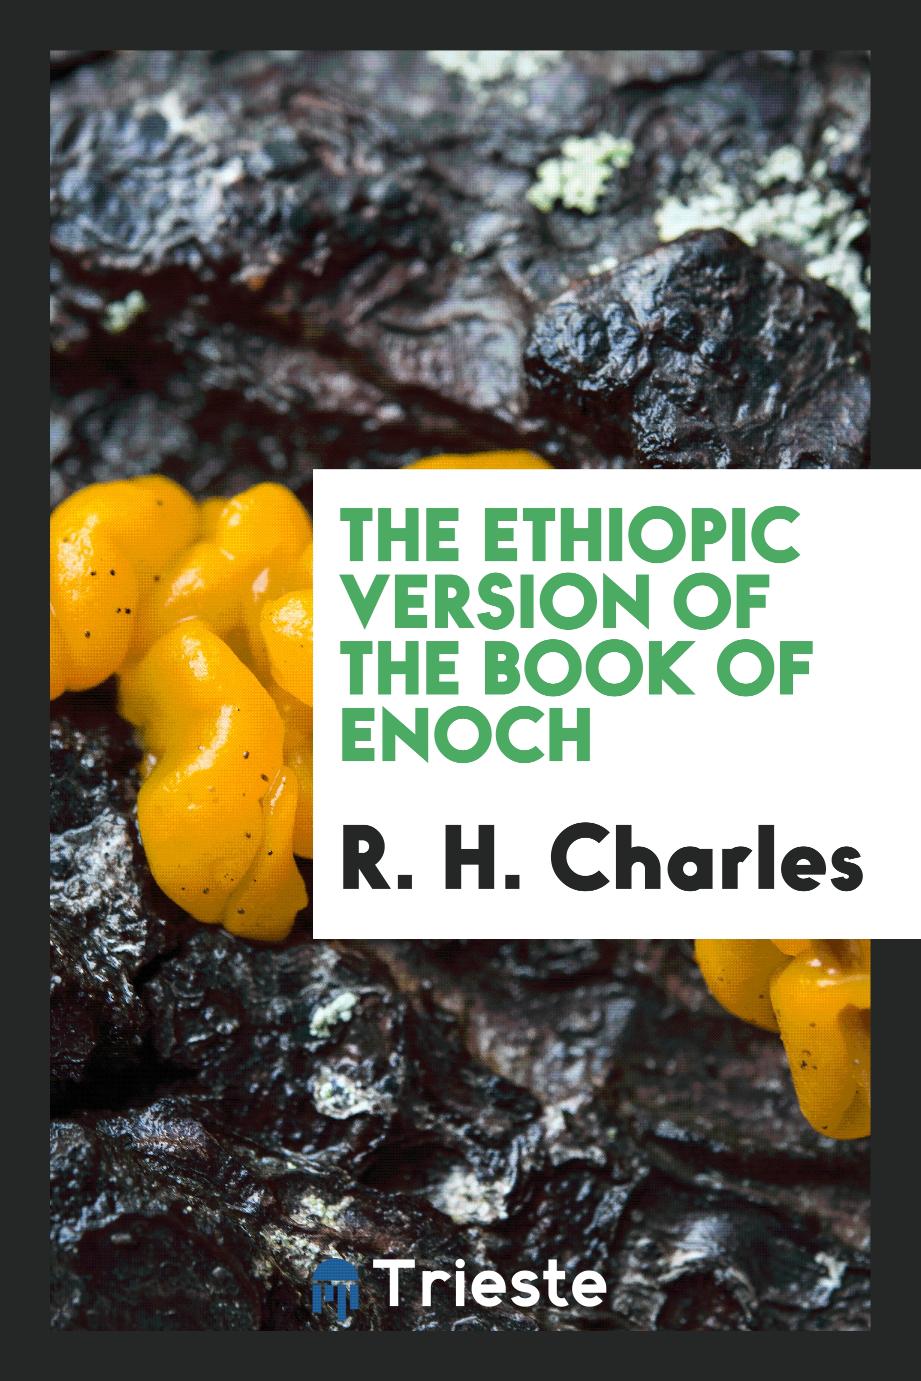 The Ethiopic version of the book of Enoch